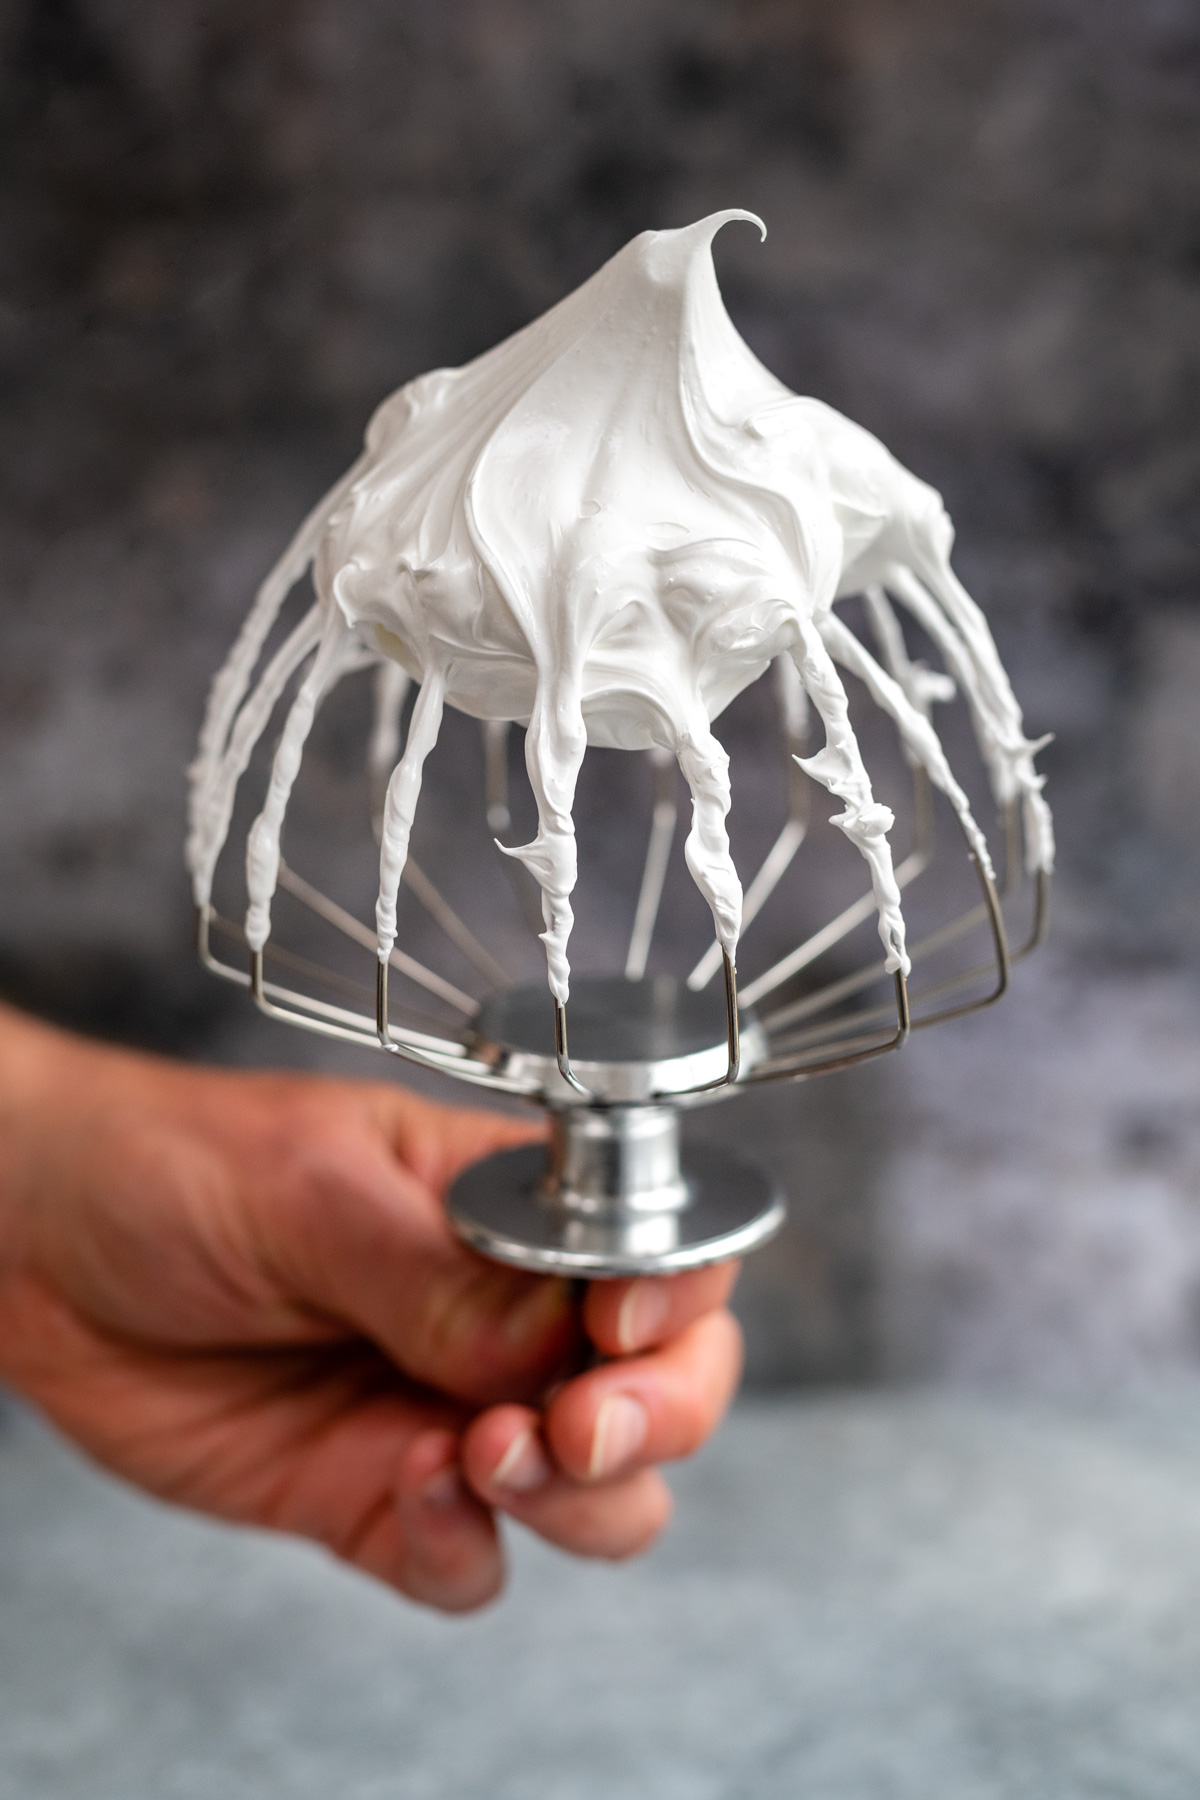 Hand holding a whisk with perfect meringue holding peaks